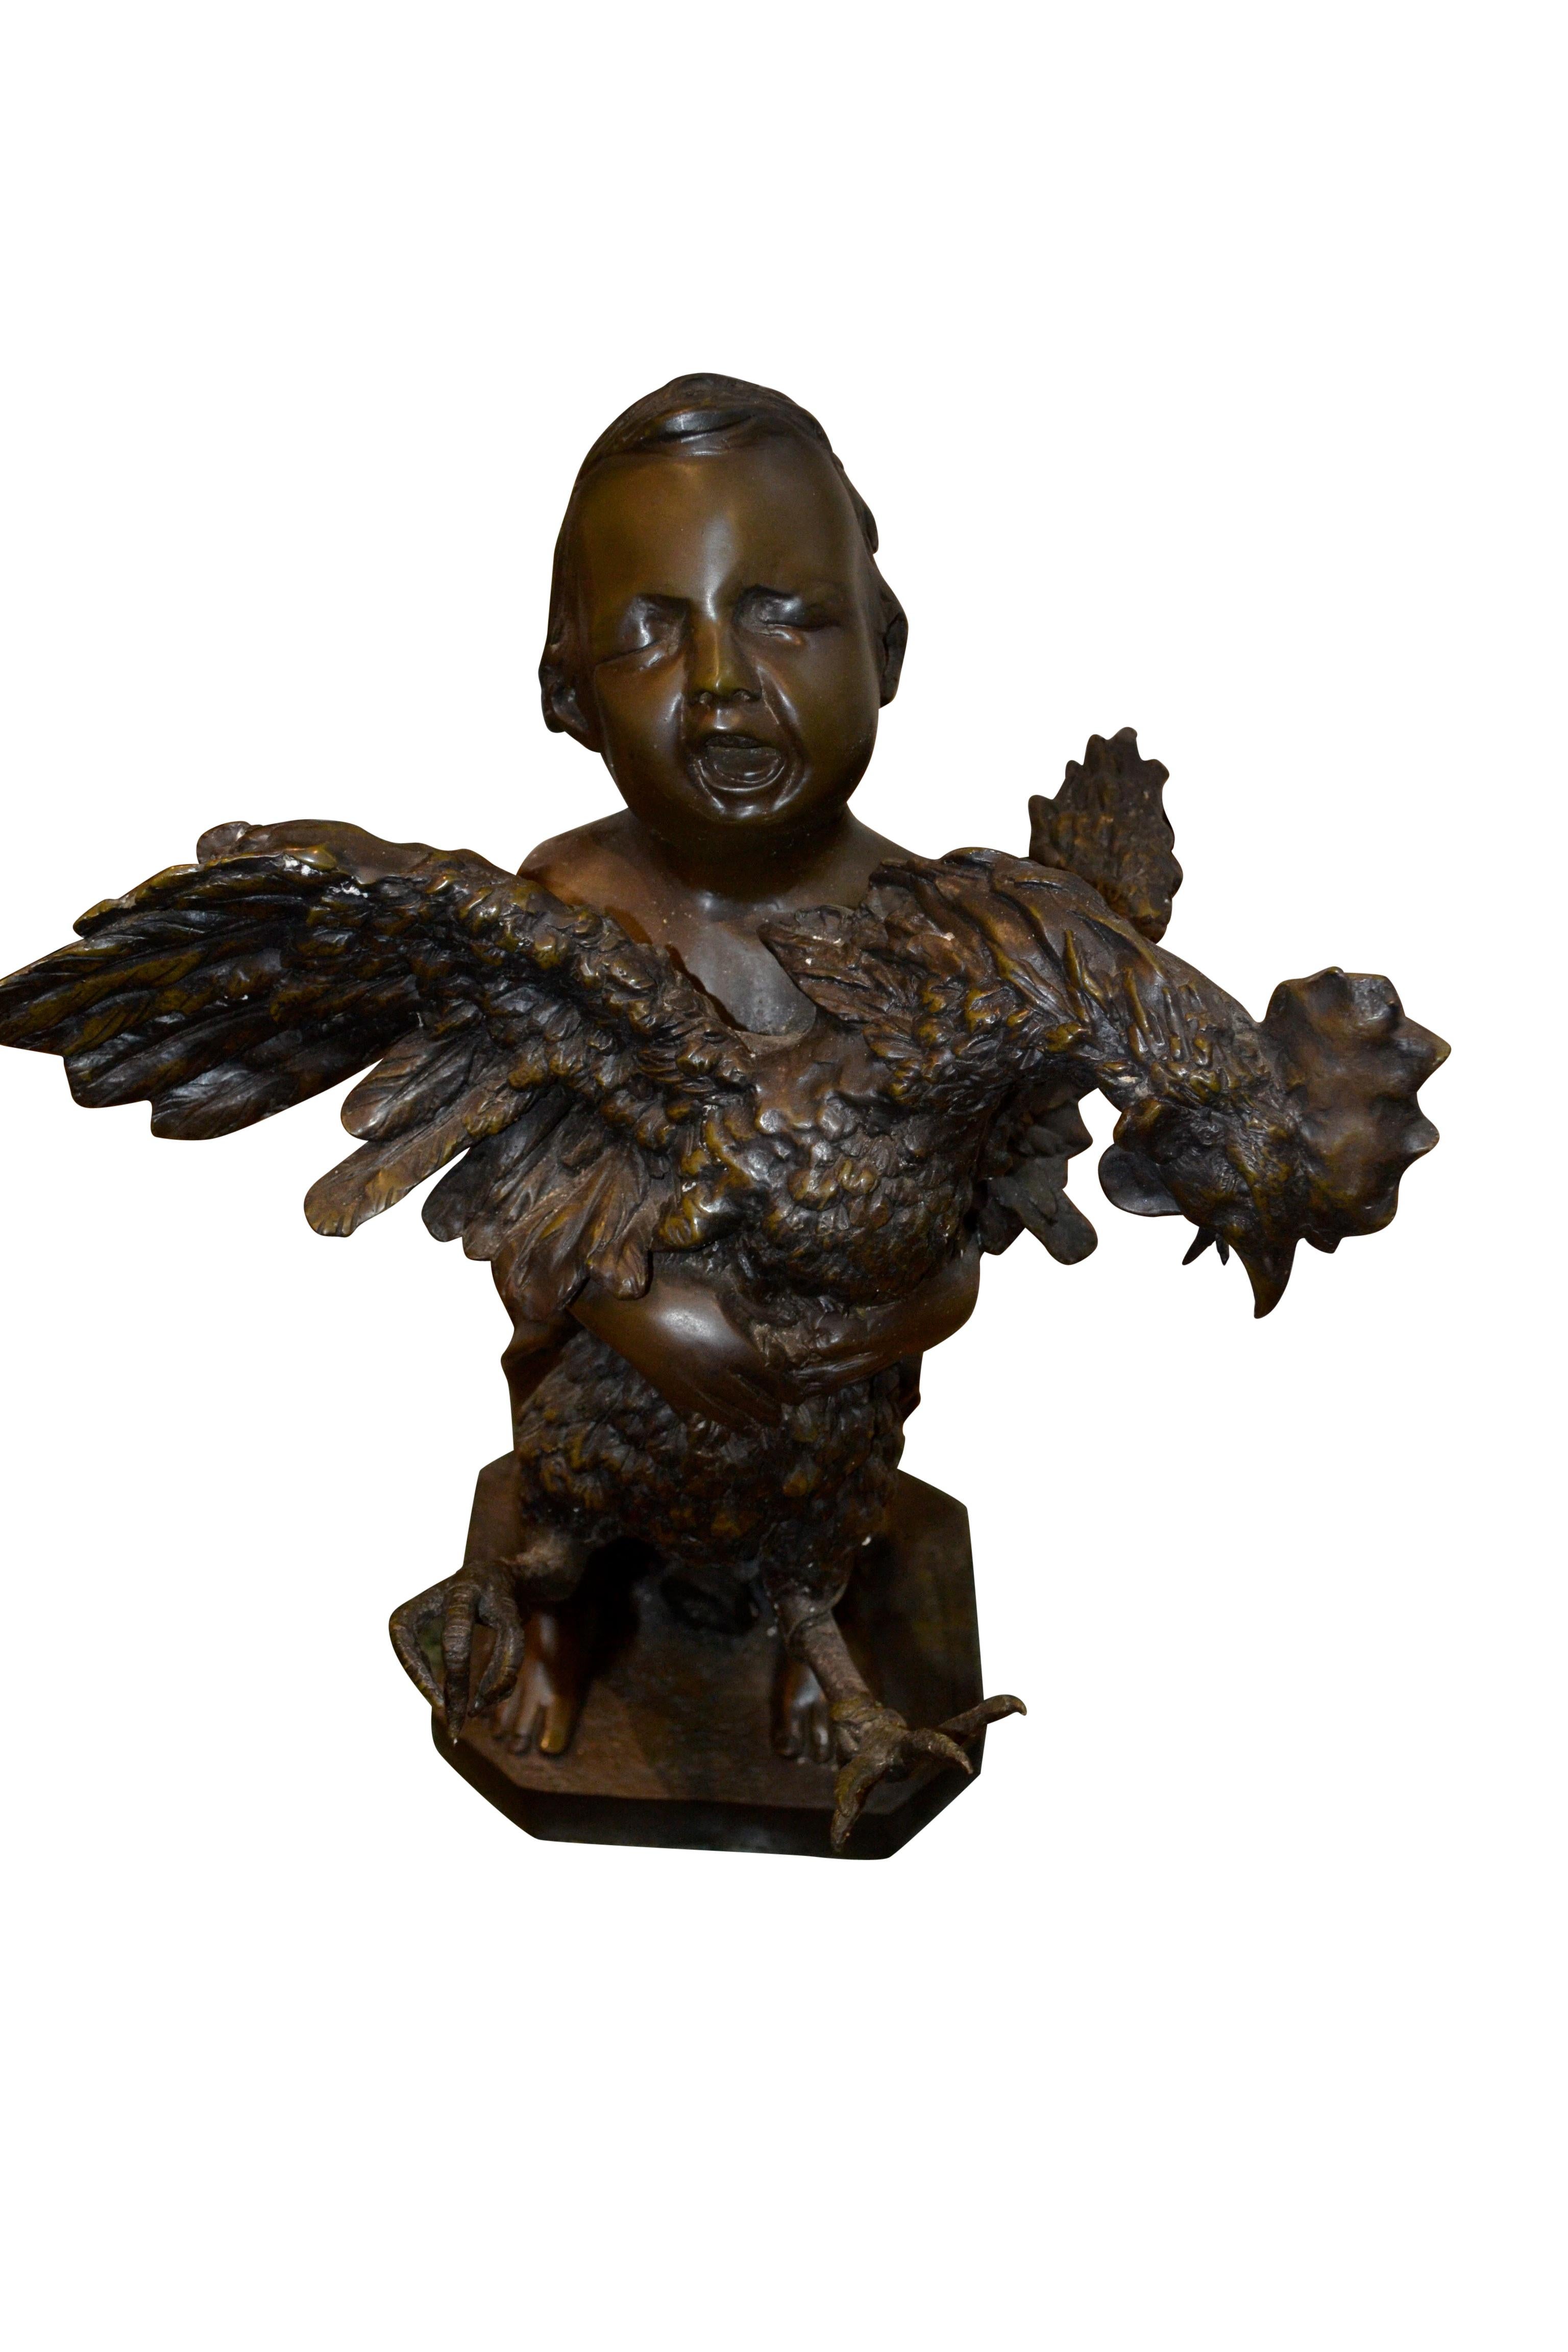 A bronze statue of a young boy standing and holding a tethered rooster with wildly flapping wings in his arms. The boy is presumably in a farmers' market and his expression shows him screaming at the top of his lungs trying to sell the rooster. The